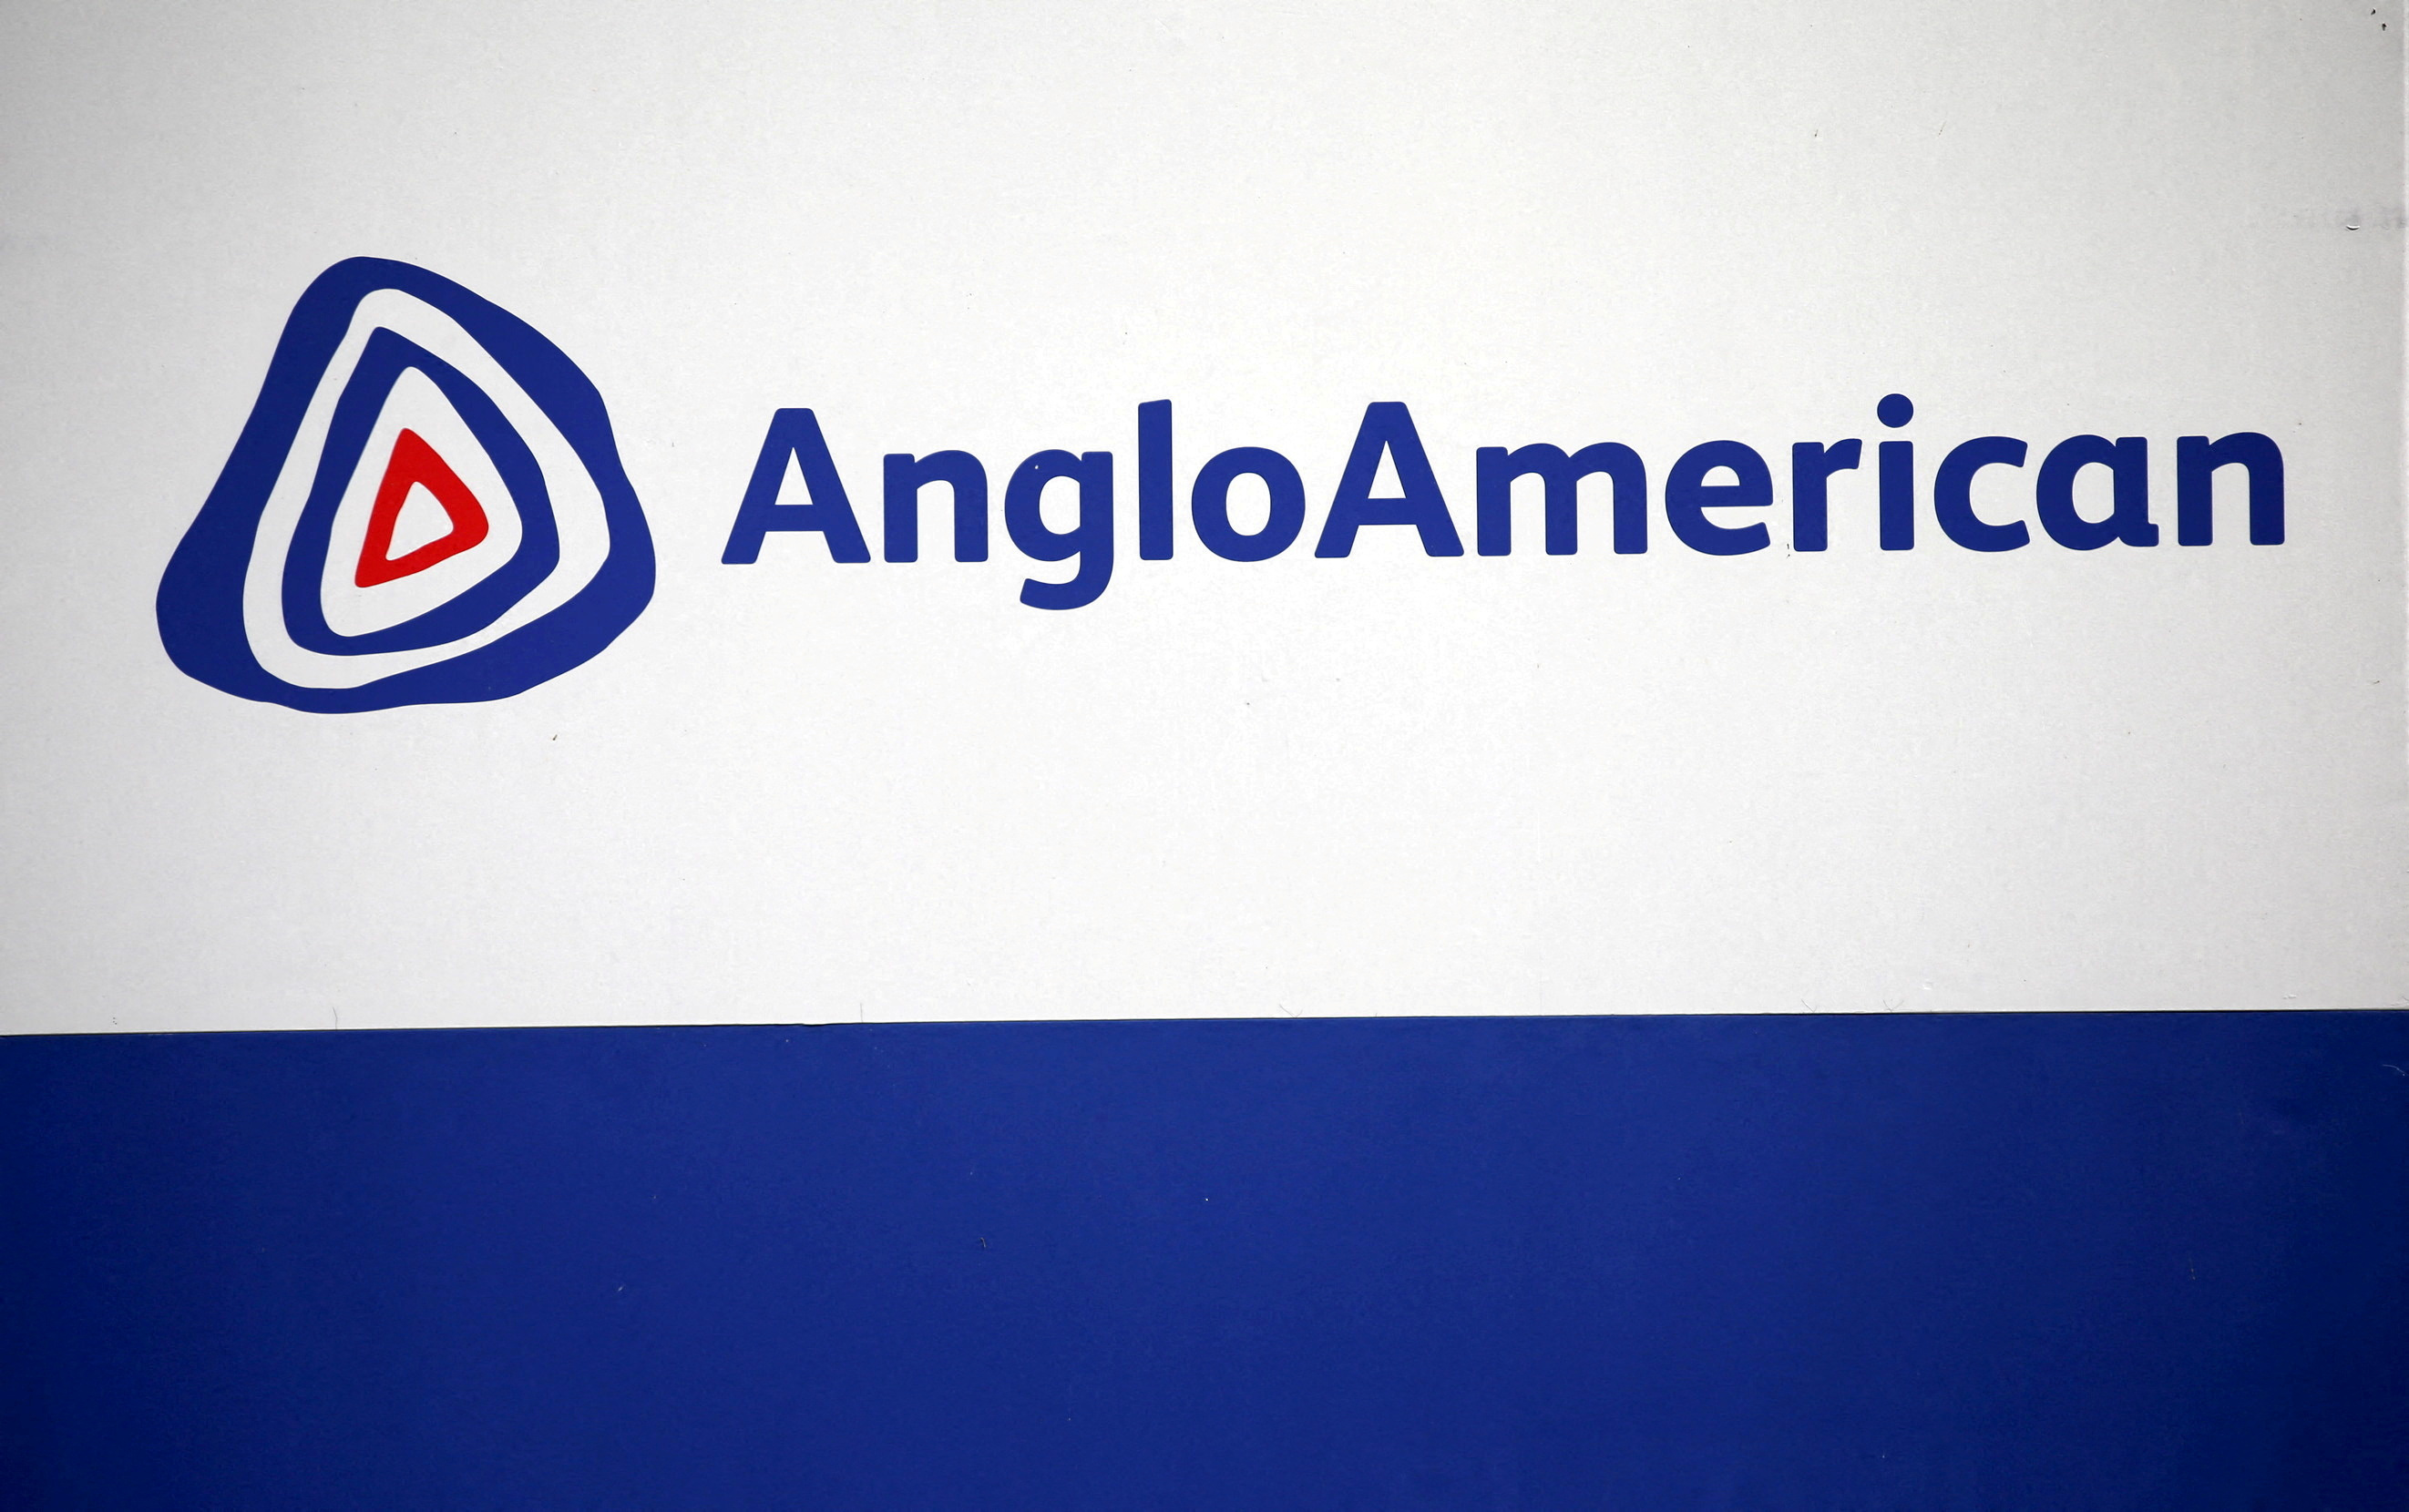 The Anglo American logo is seen in Rusternburg